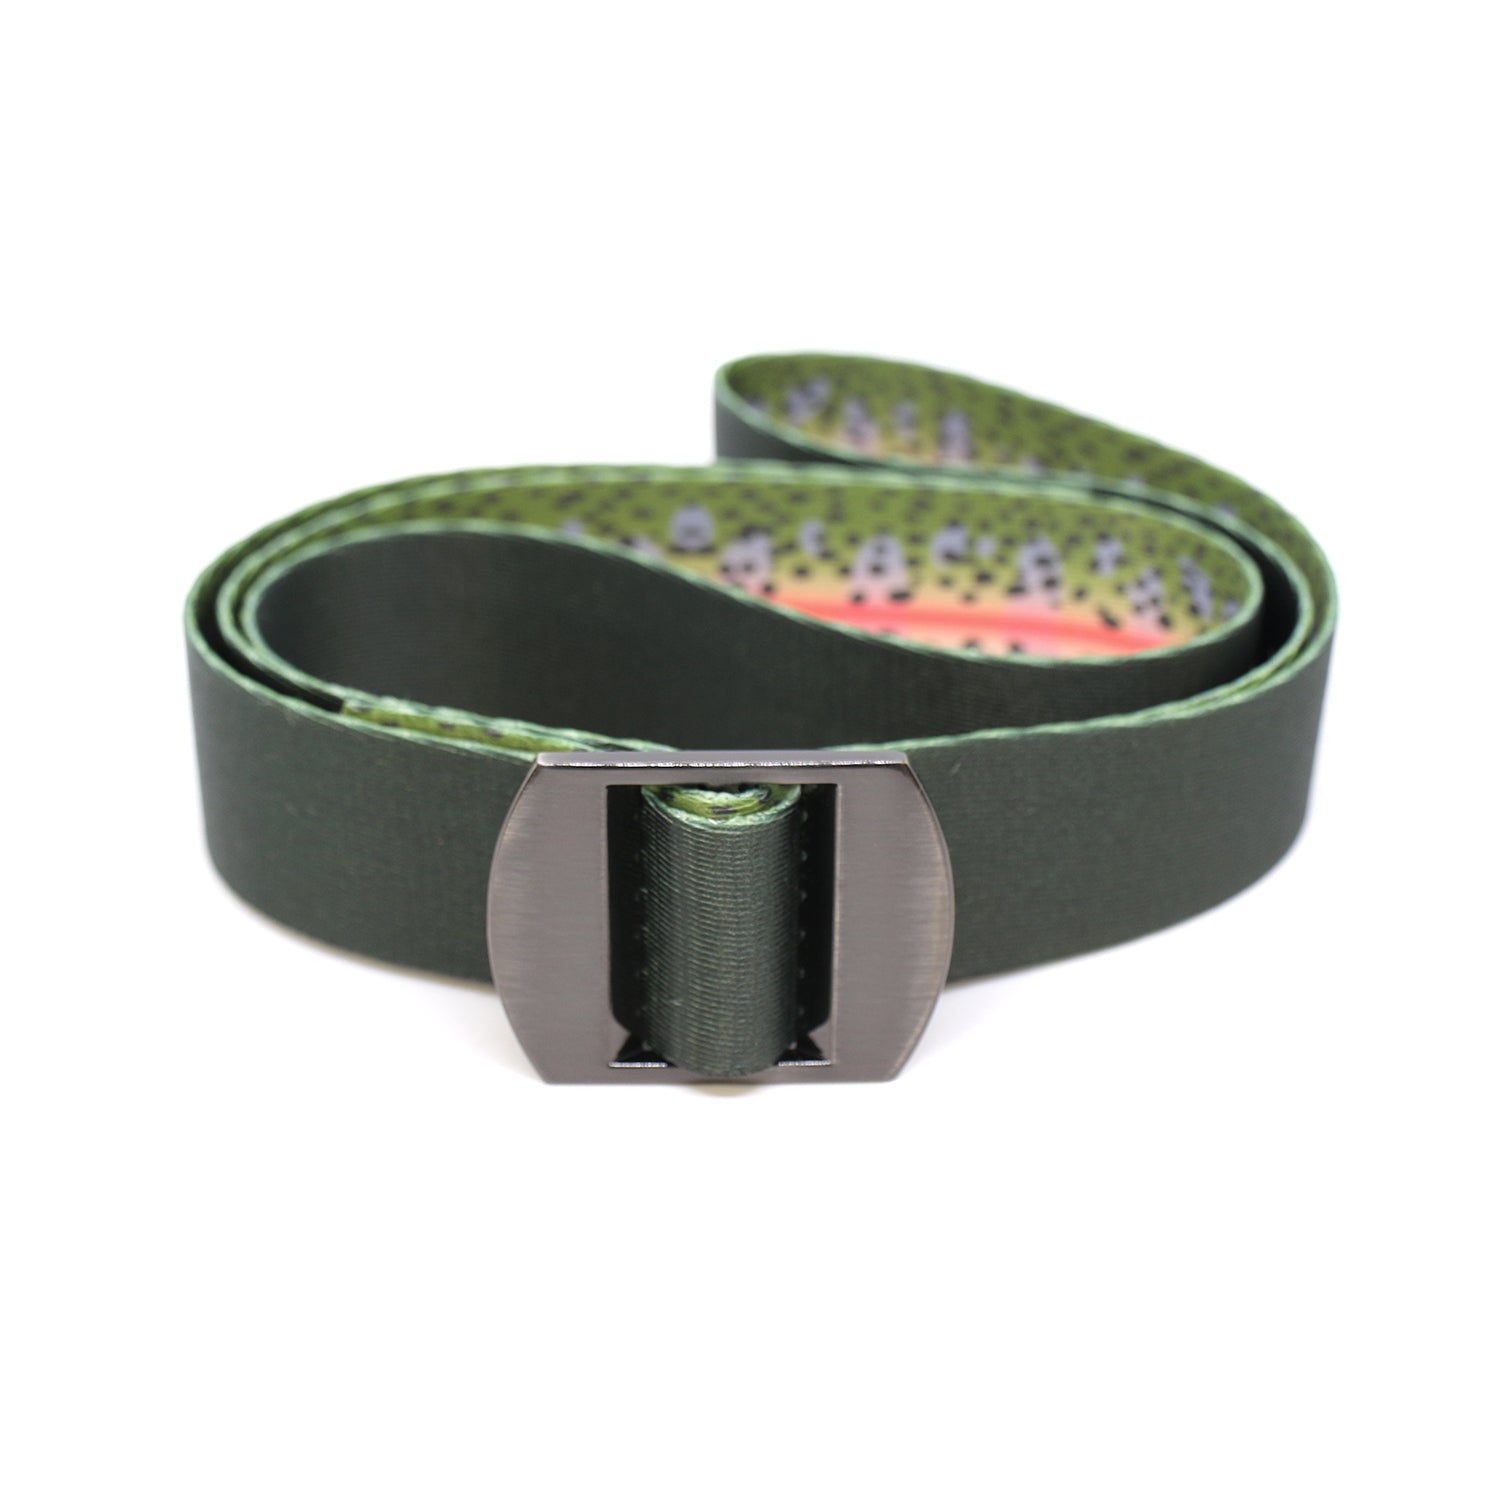 A nylon belt with a metal buckle has rainbow trout print, reversed to show the black backside of the belt